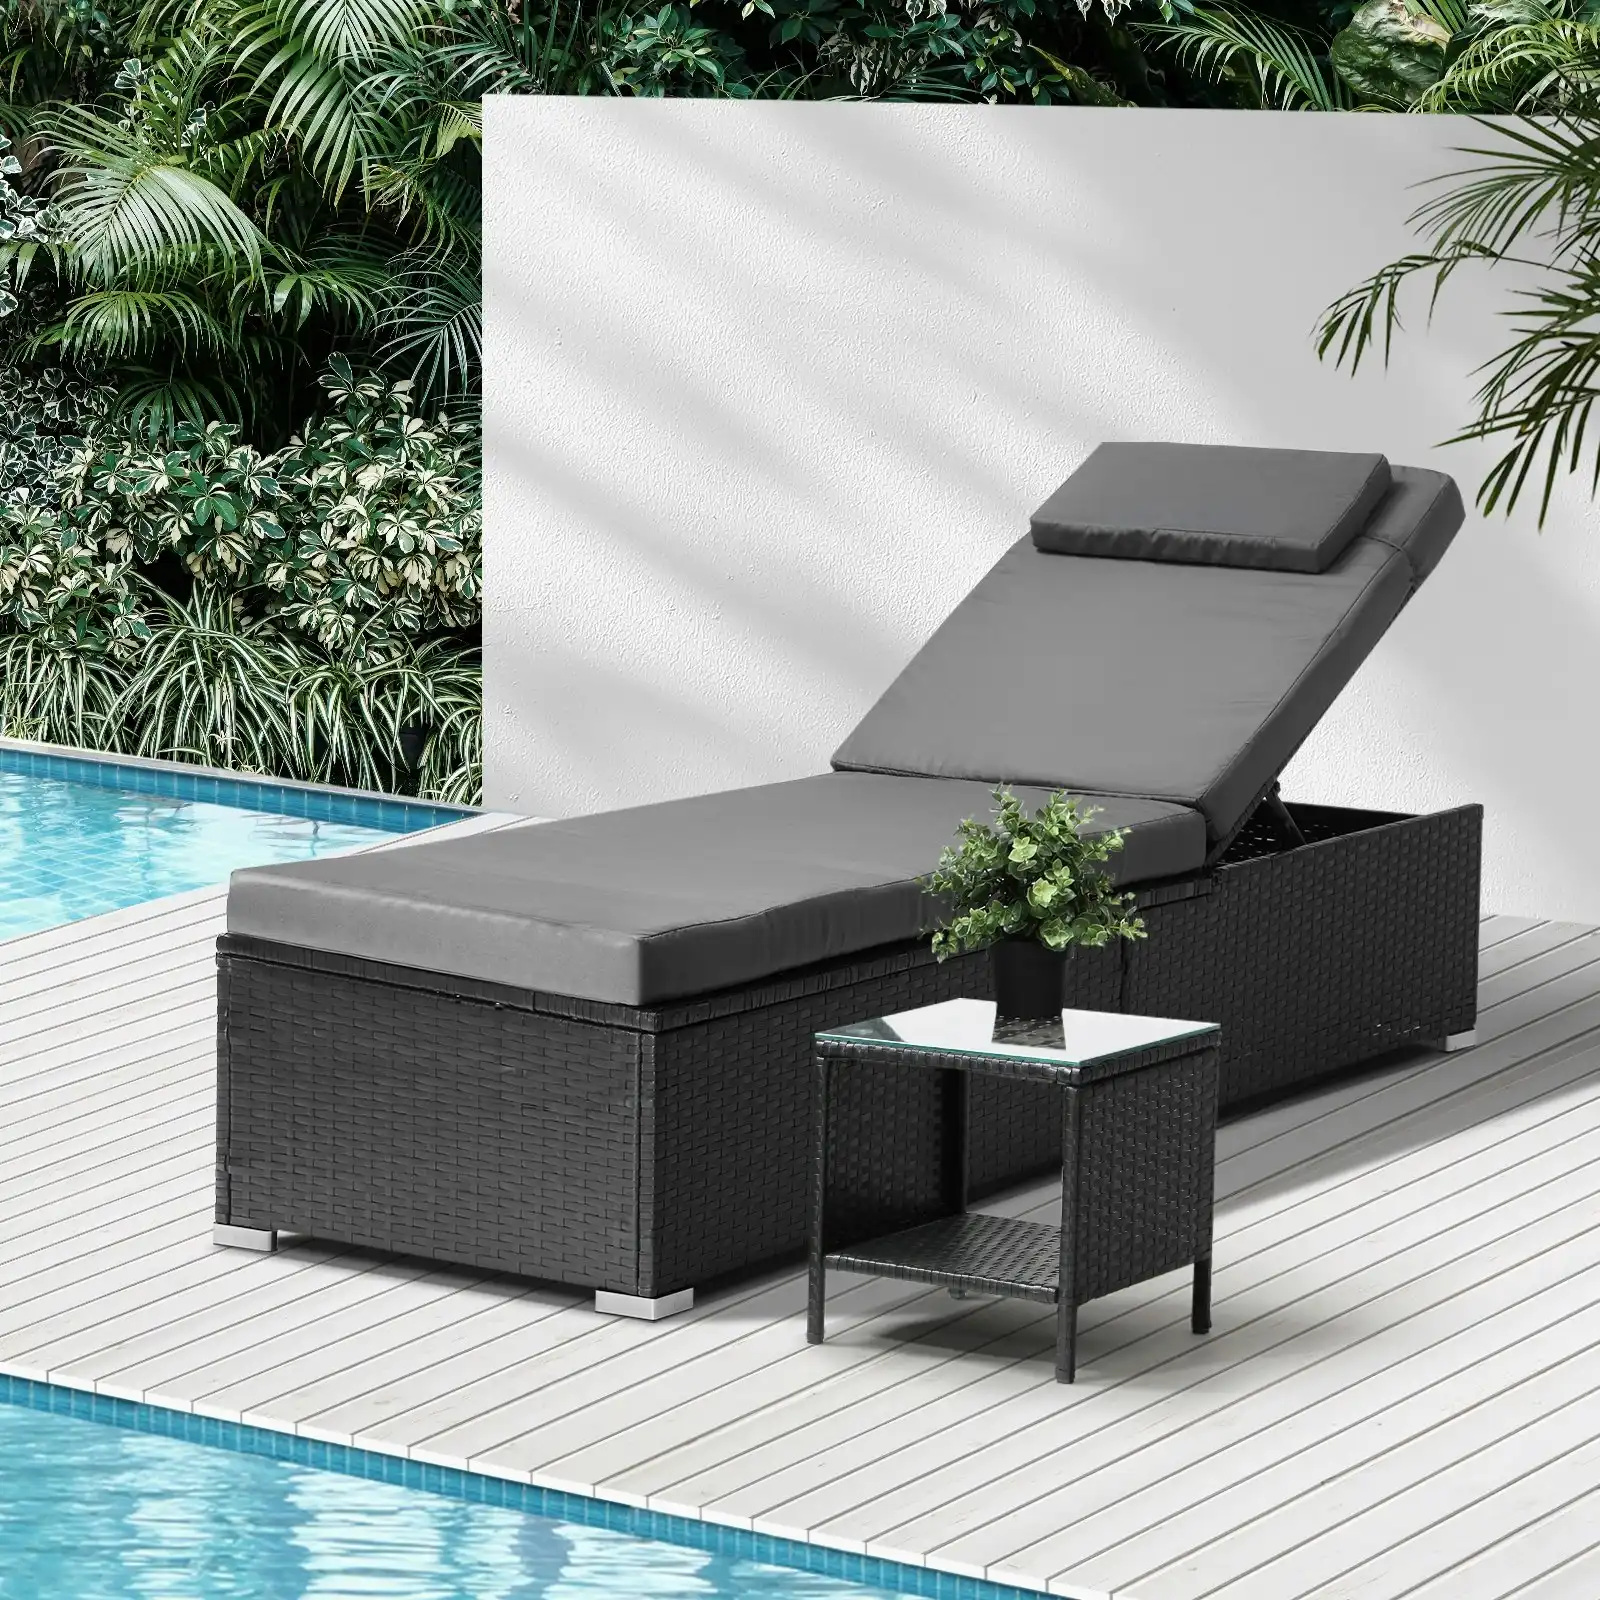 Livsip Sun Lounge Wicker Lounger Table Patio Furniture Outdoor Setting Day Bed